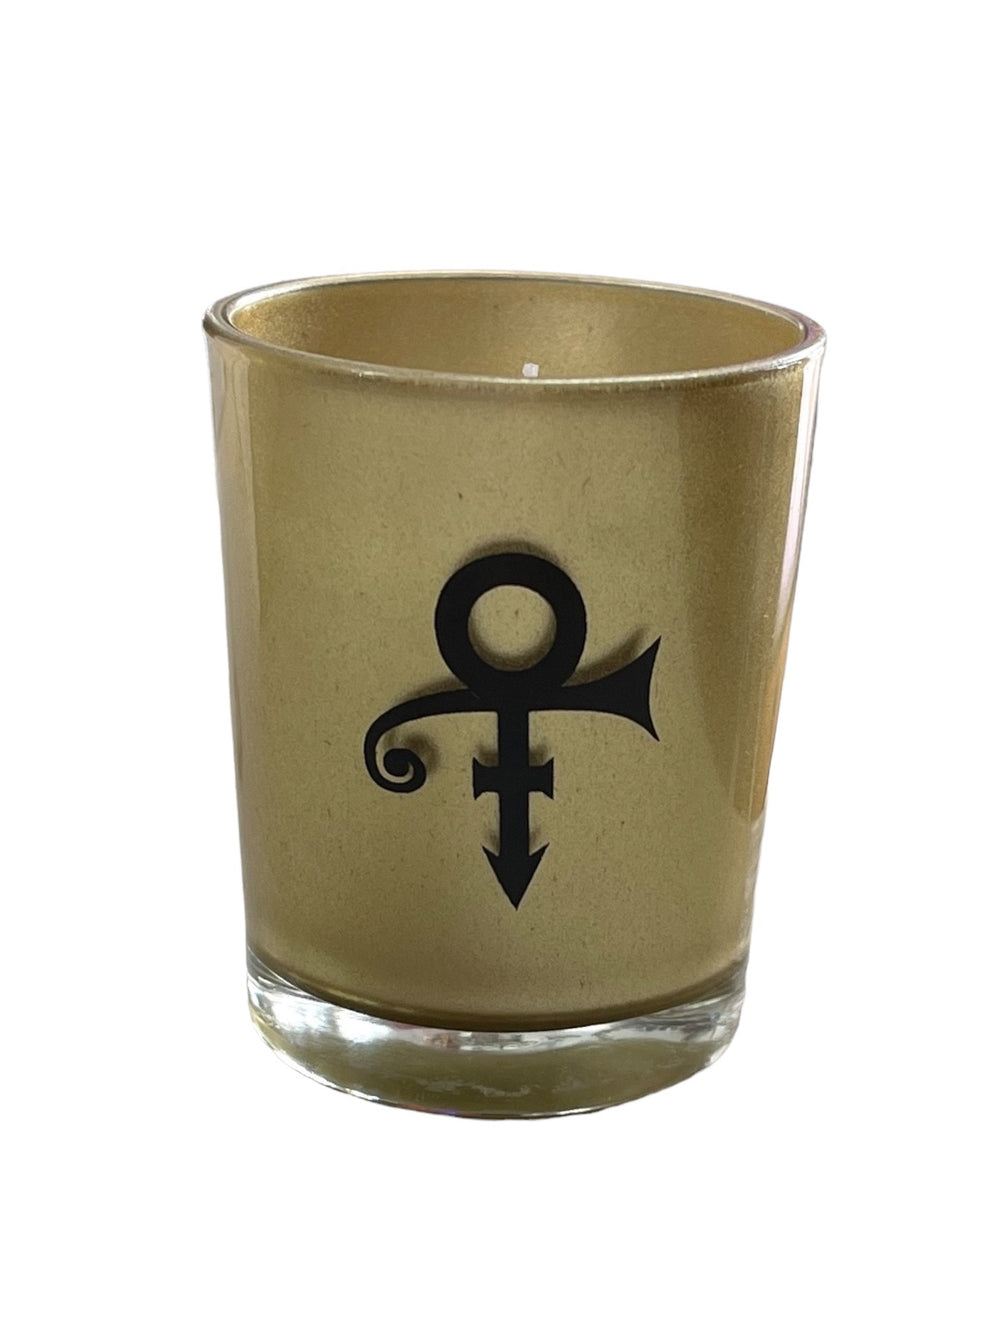 The Gold Experience Love Symbol Candle/Holder XCLUSIVE Official Merchandise Prince